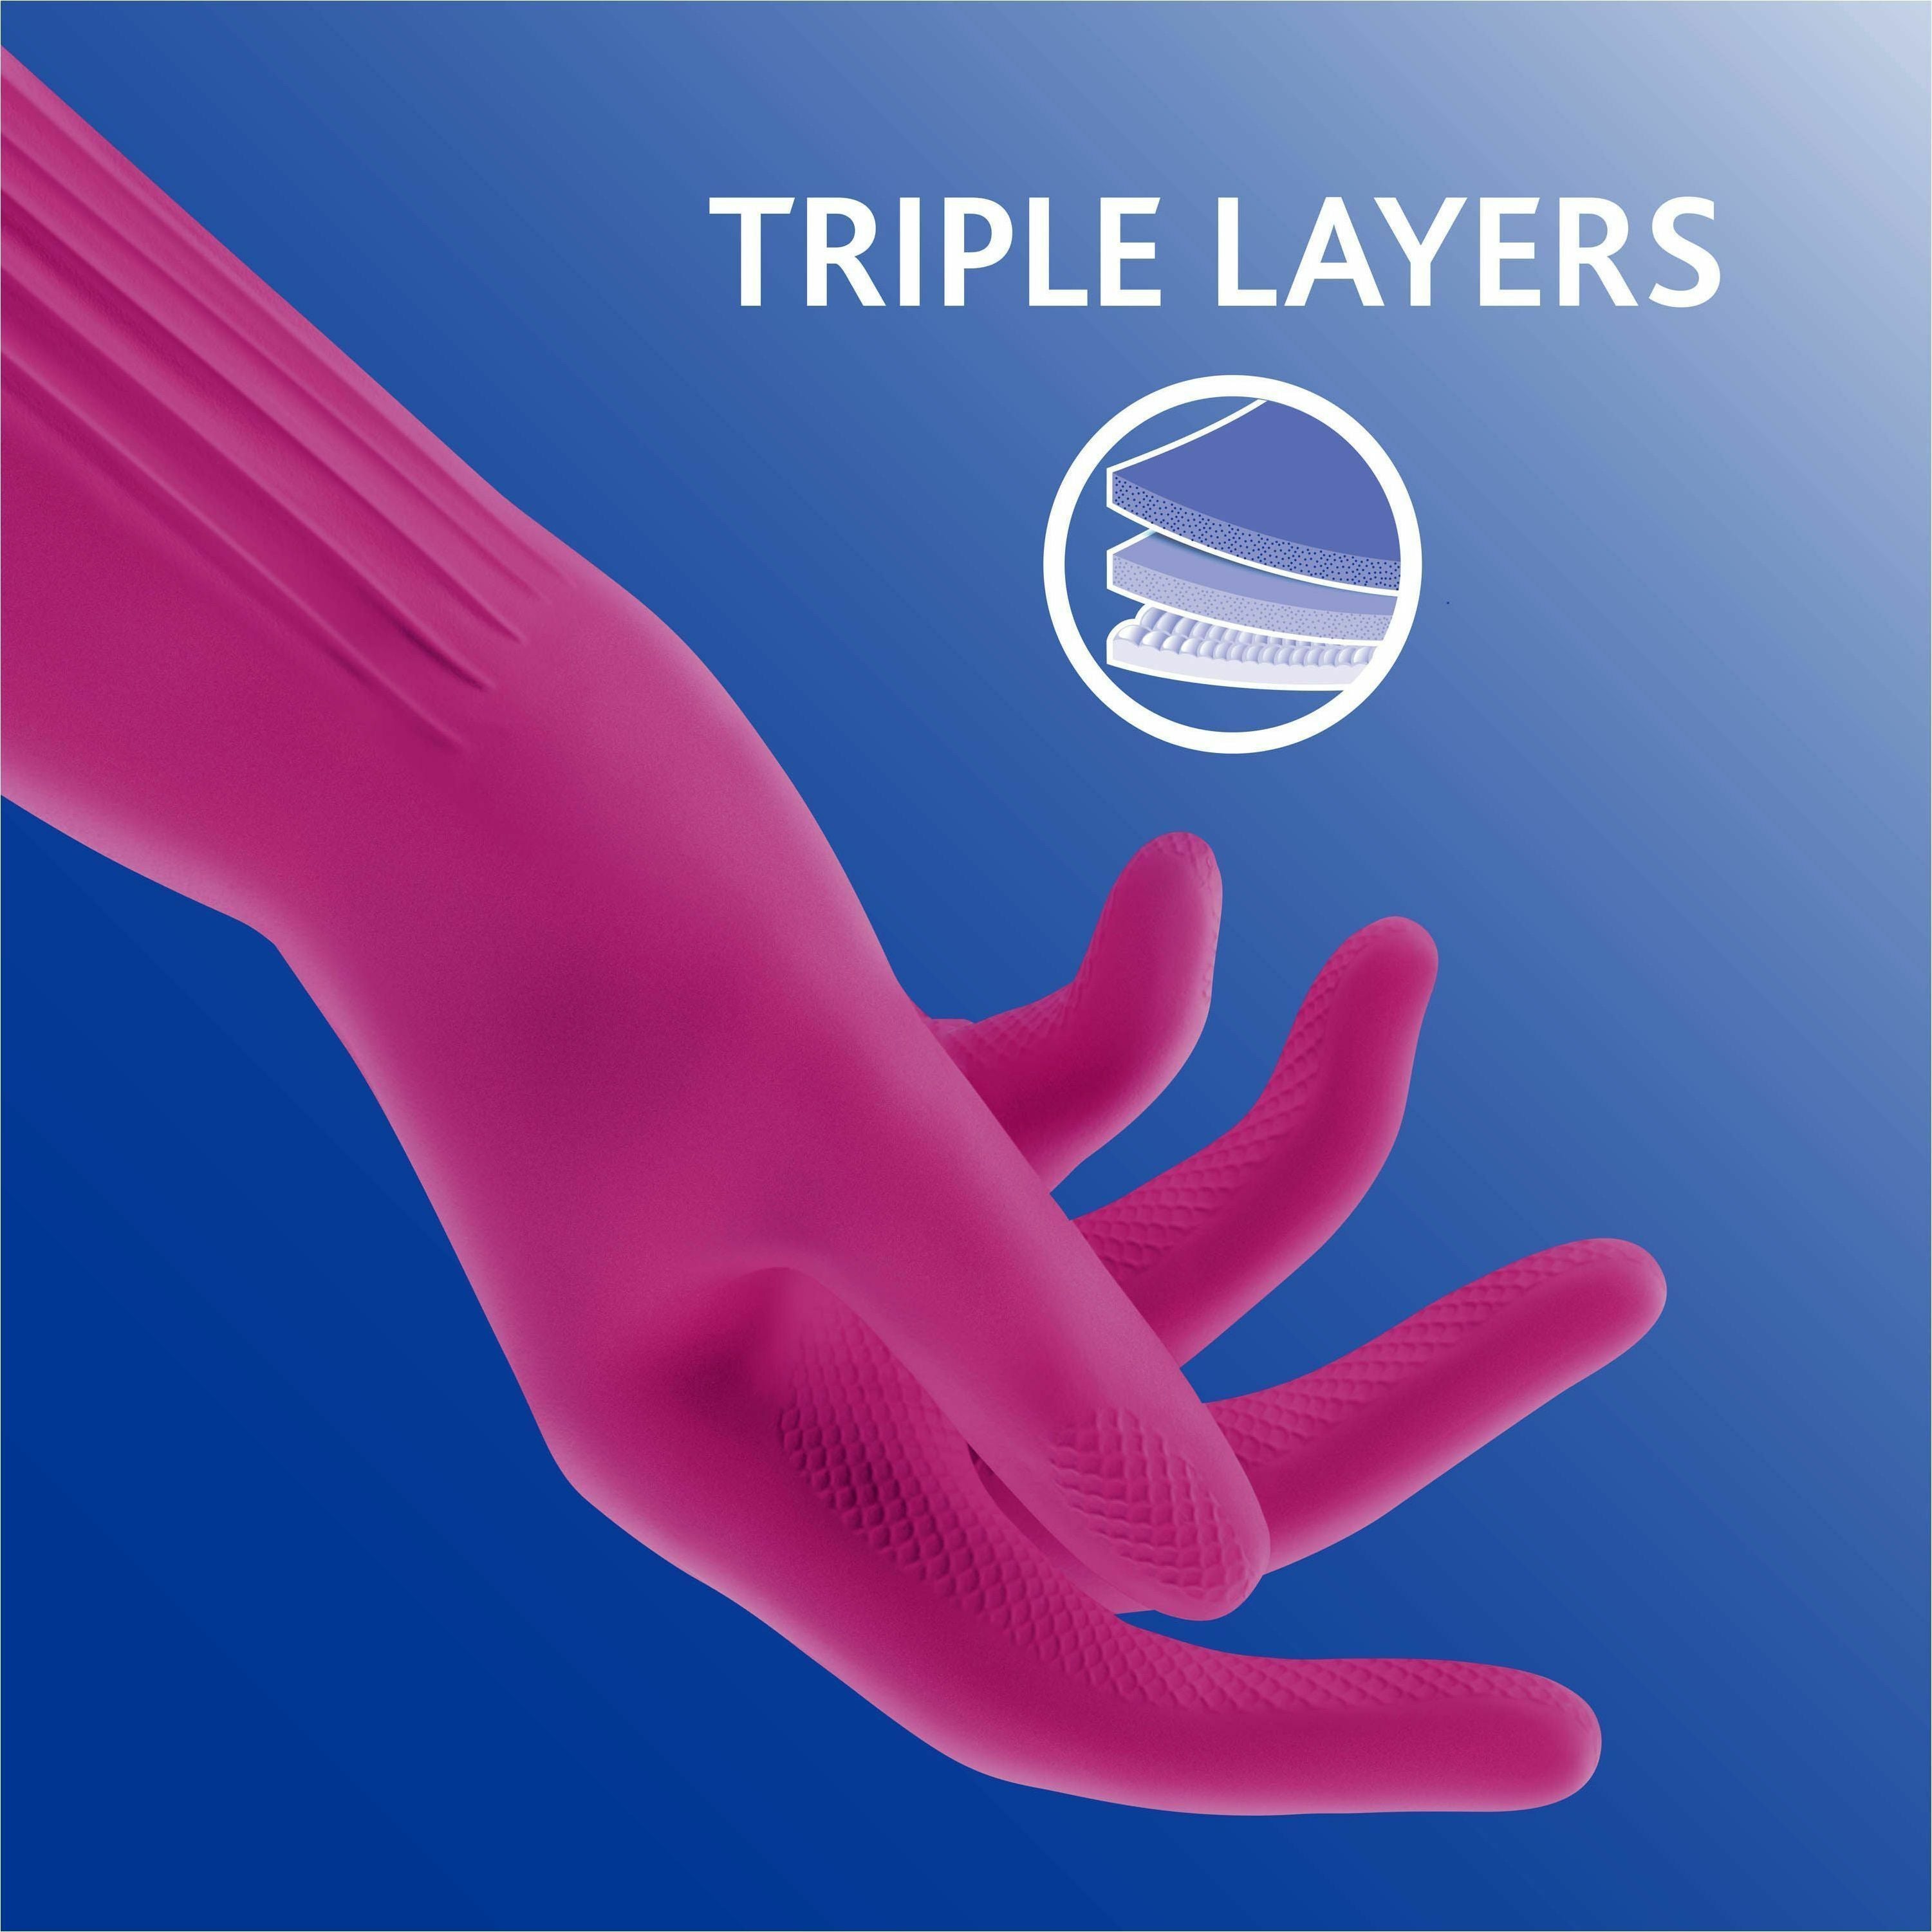 o-cedar-playtex-living-gloves-chemical-bacteria-protection-small-size-latex-neoprene-nitrile-pink-anti-microbial-reusable-durable-comfortable-odor-resistant-textured-palm-textured-fingertip-for-household-cleaning-2-pair-14_fhp166118 - 2